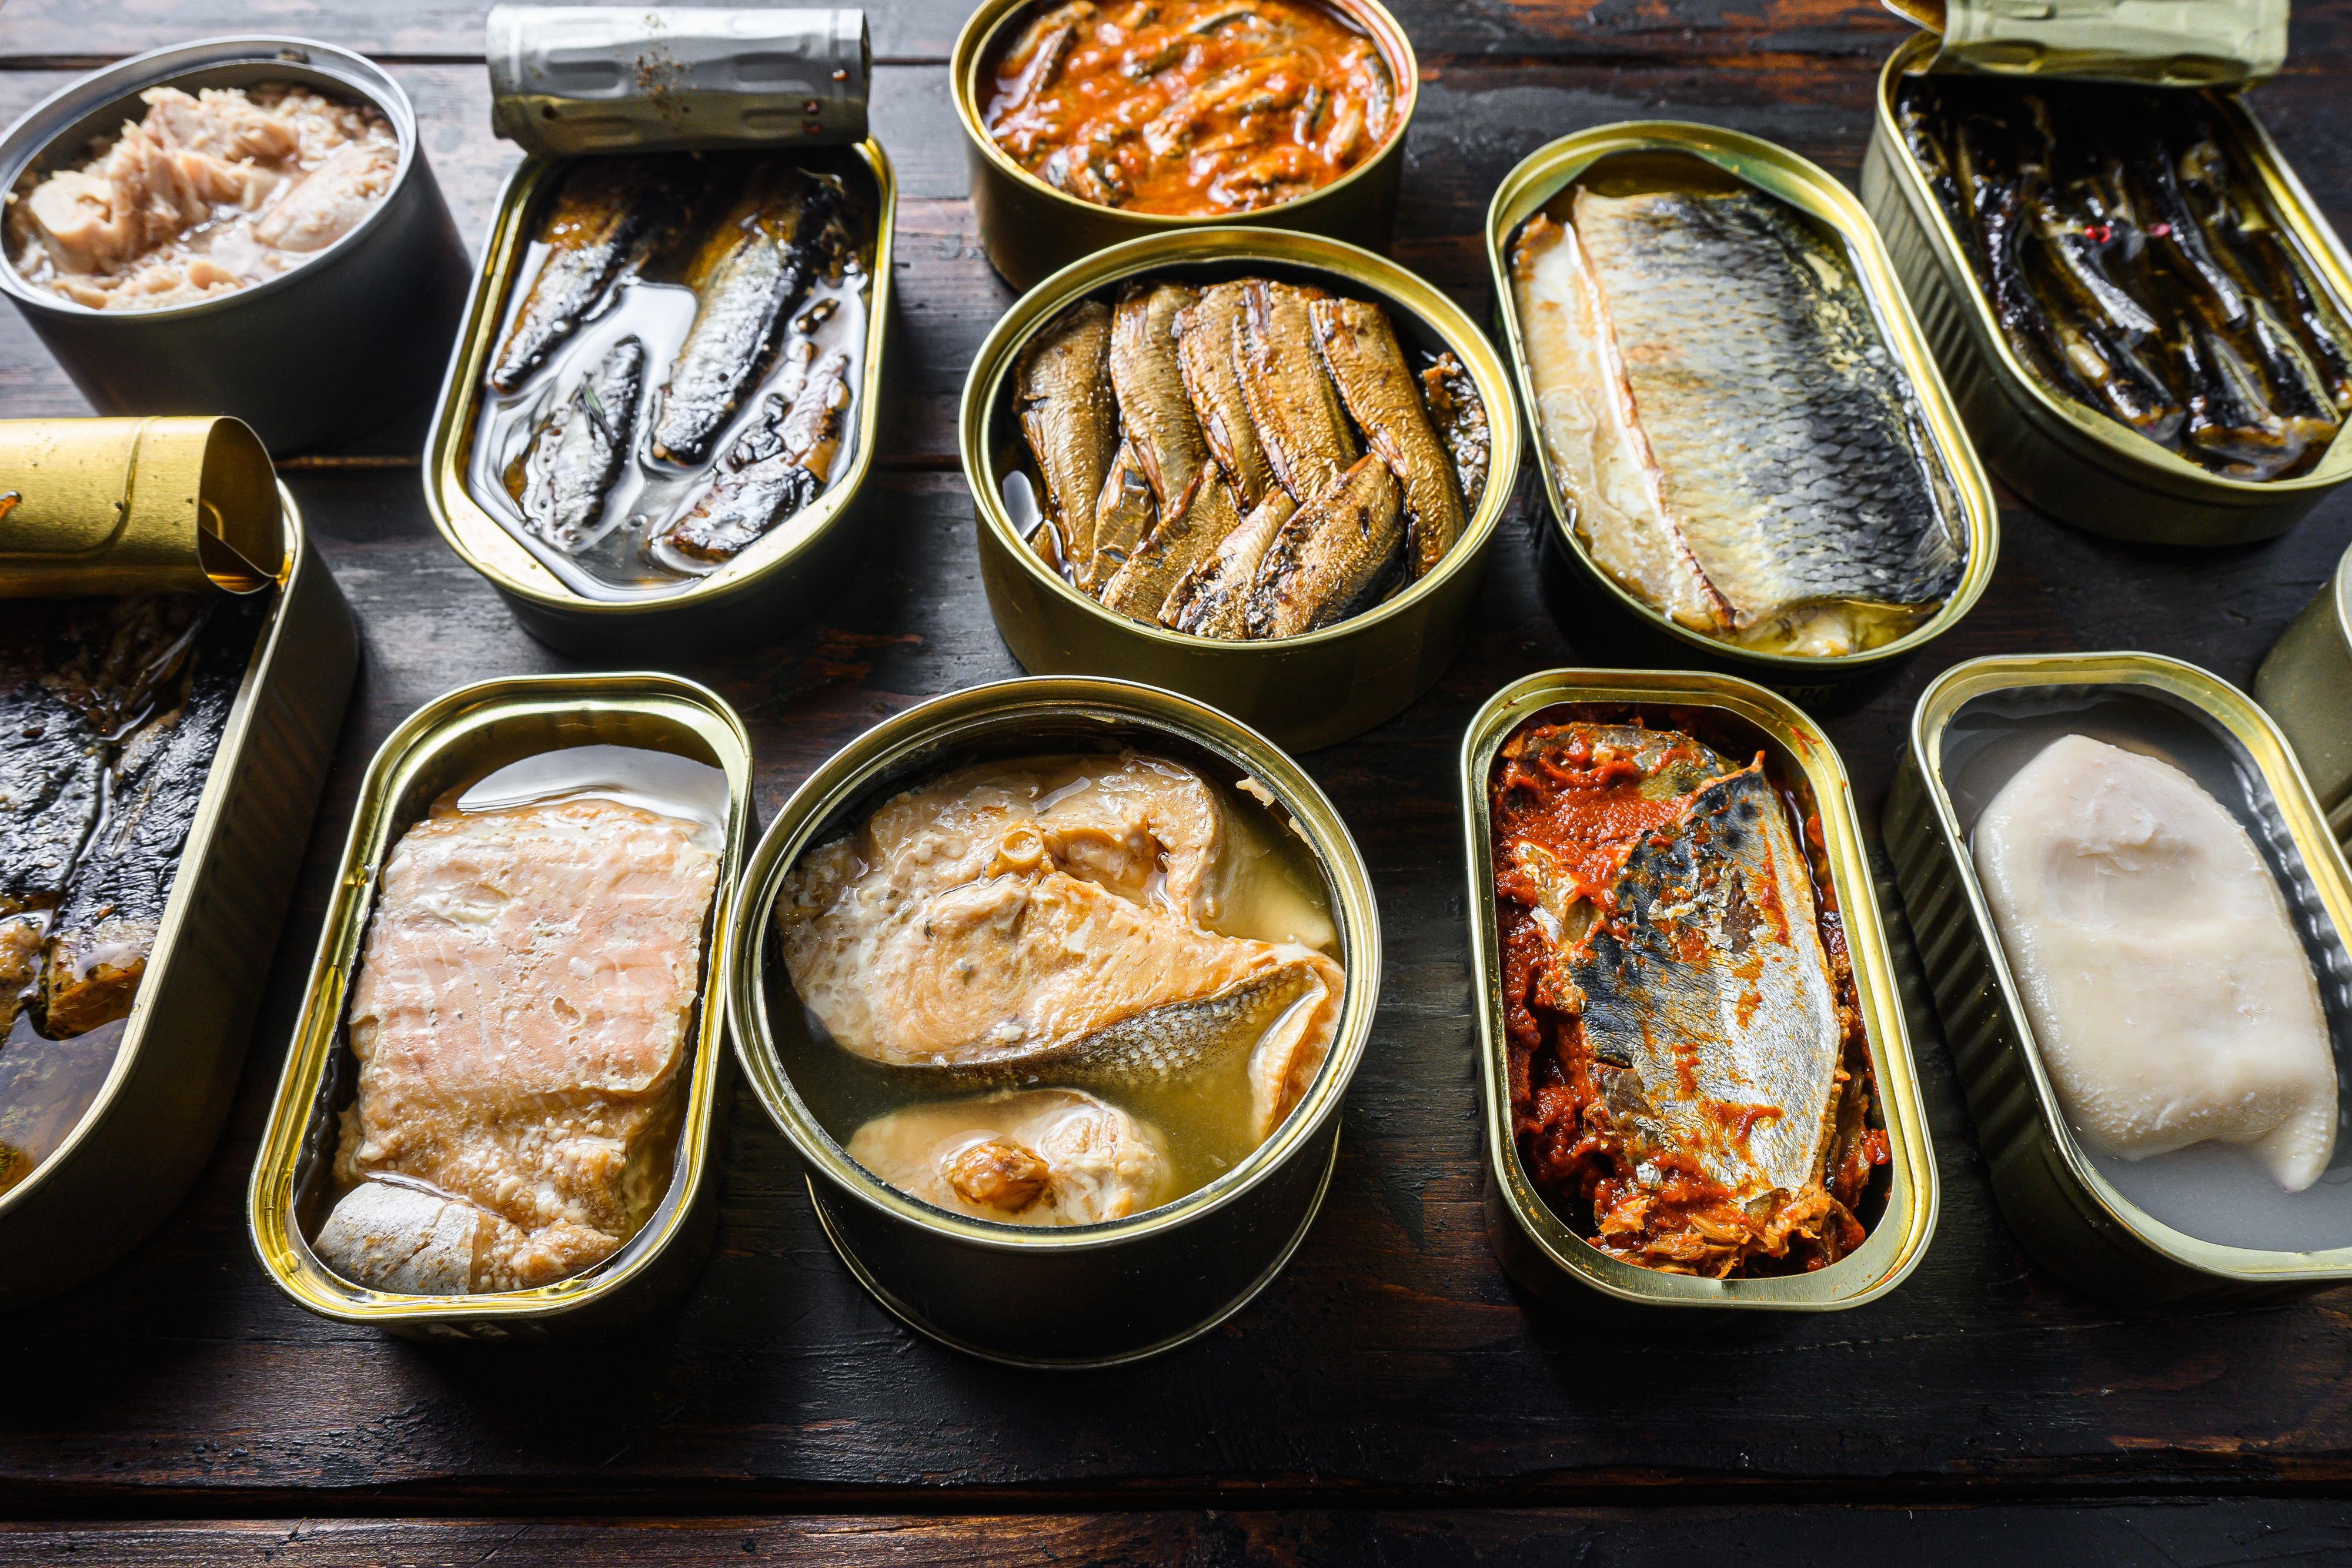 Opened preserve cans with Saury, mackerel, sprats, sardines, pilchard, squid, tuna over vintage homemade wood table close up side view